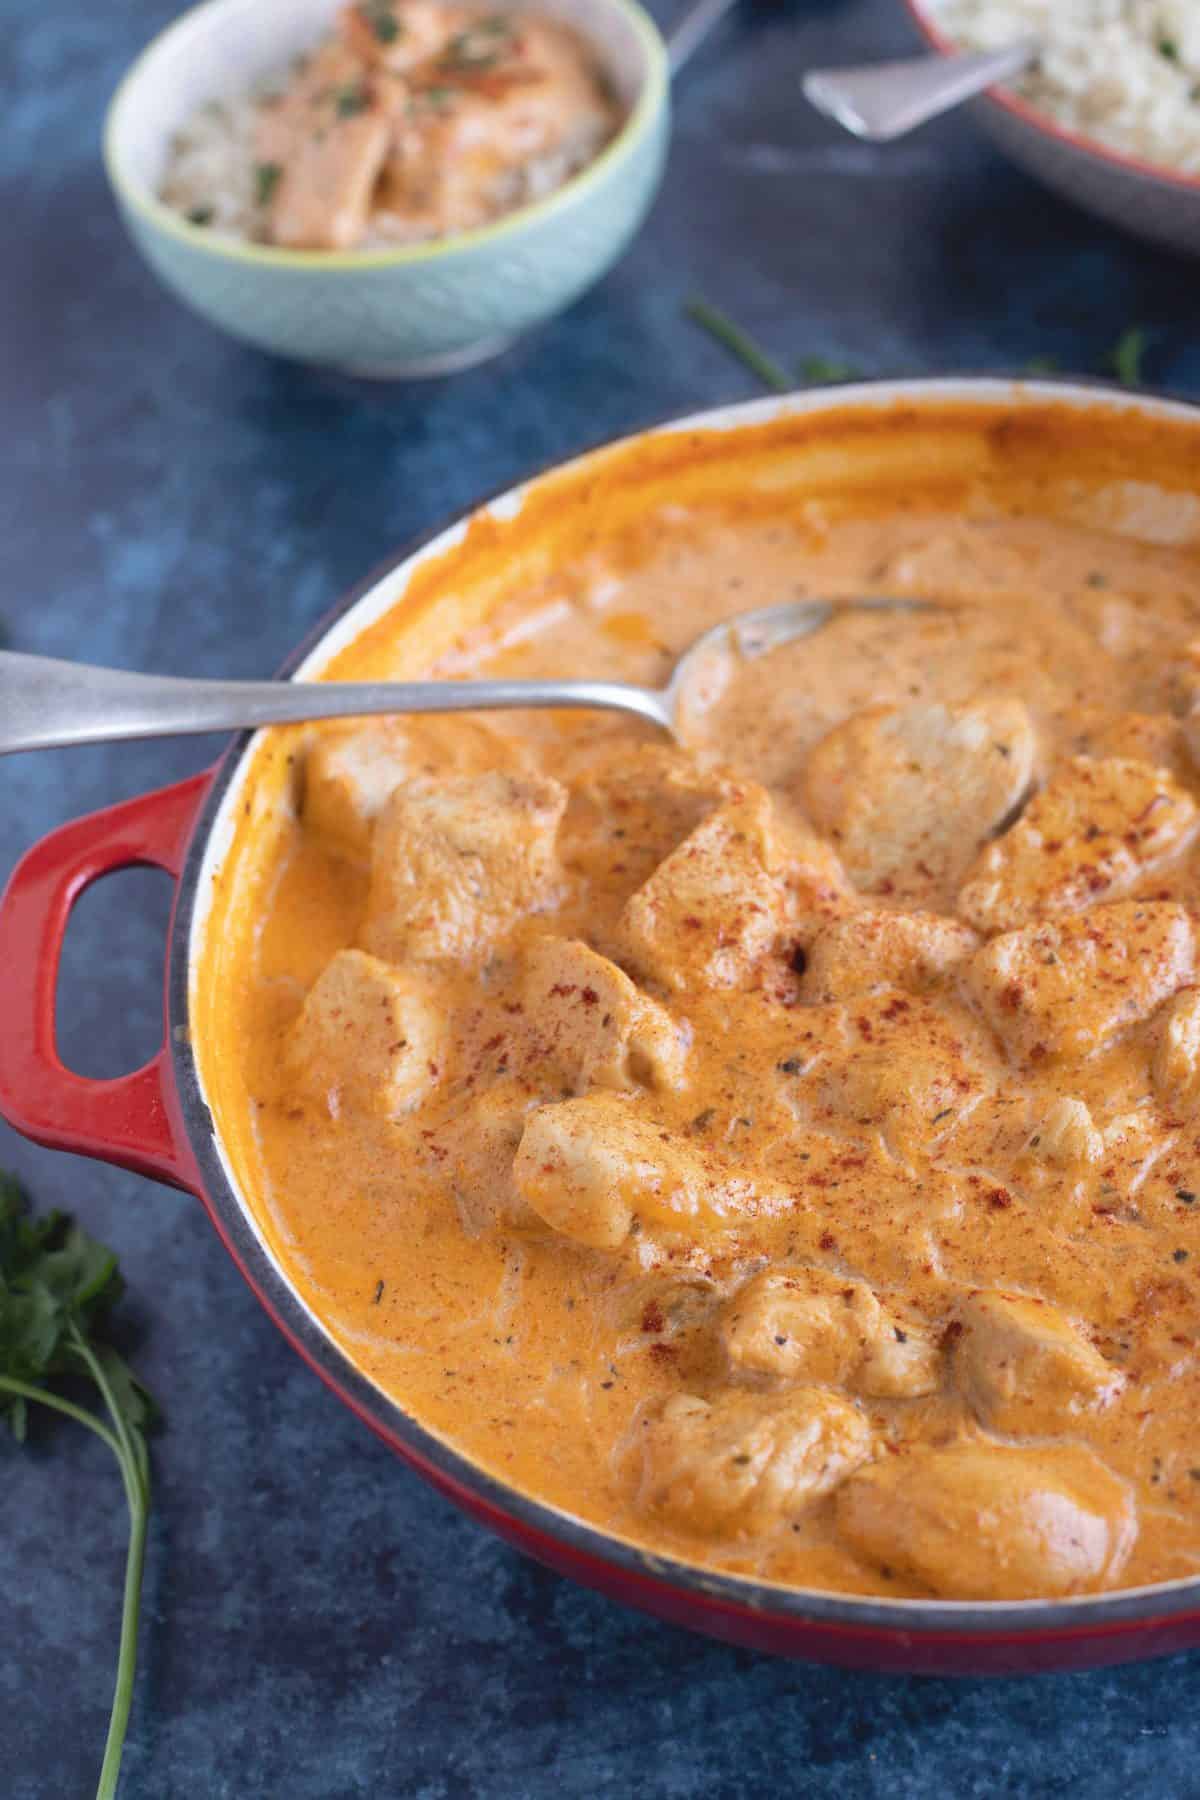 Chicken stroganoff with mushrooms in a red pan.